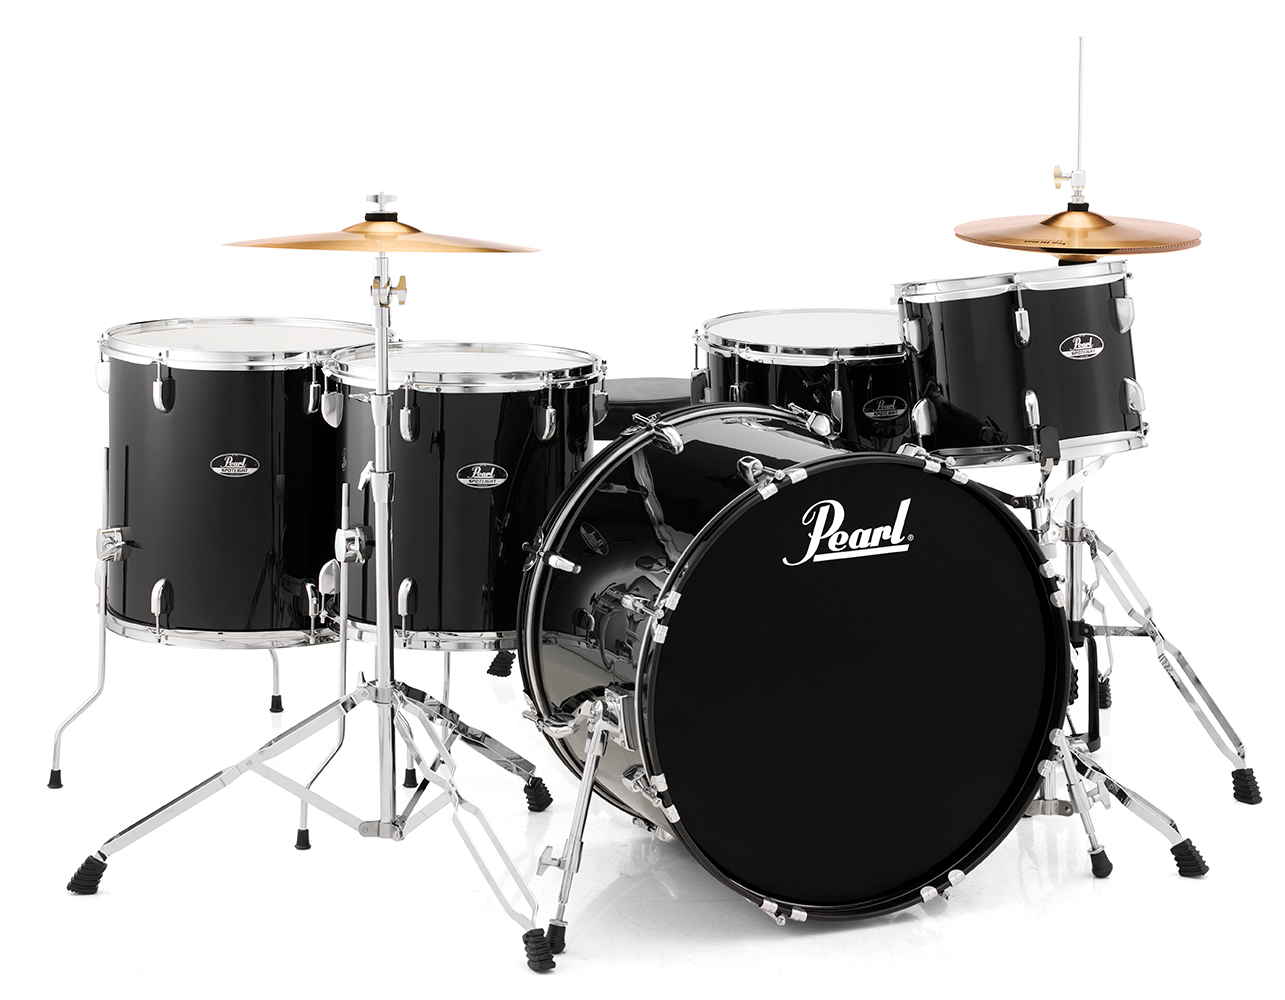 Pearl Drums Roadshow